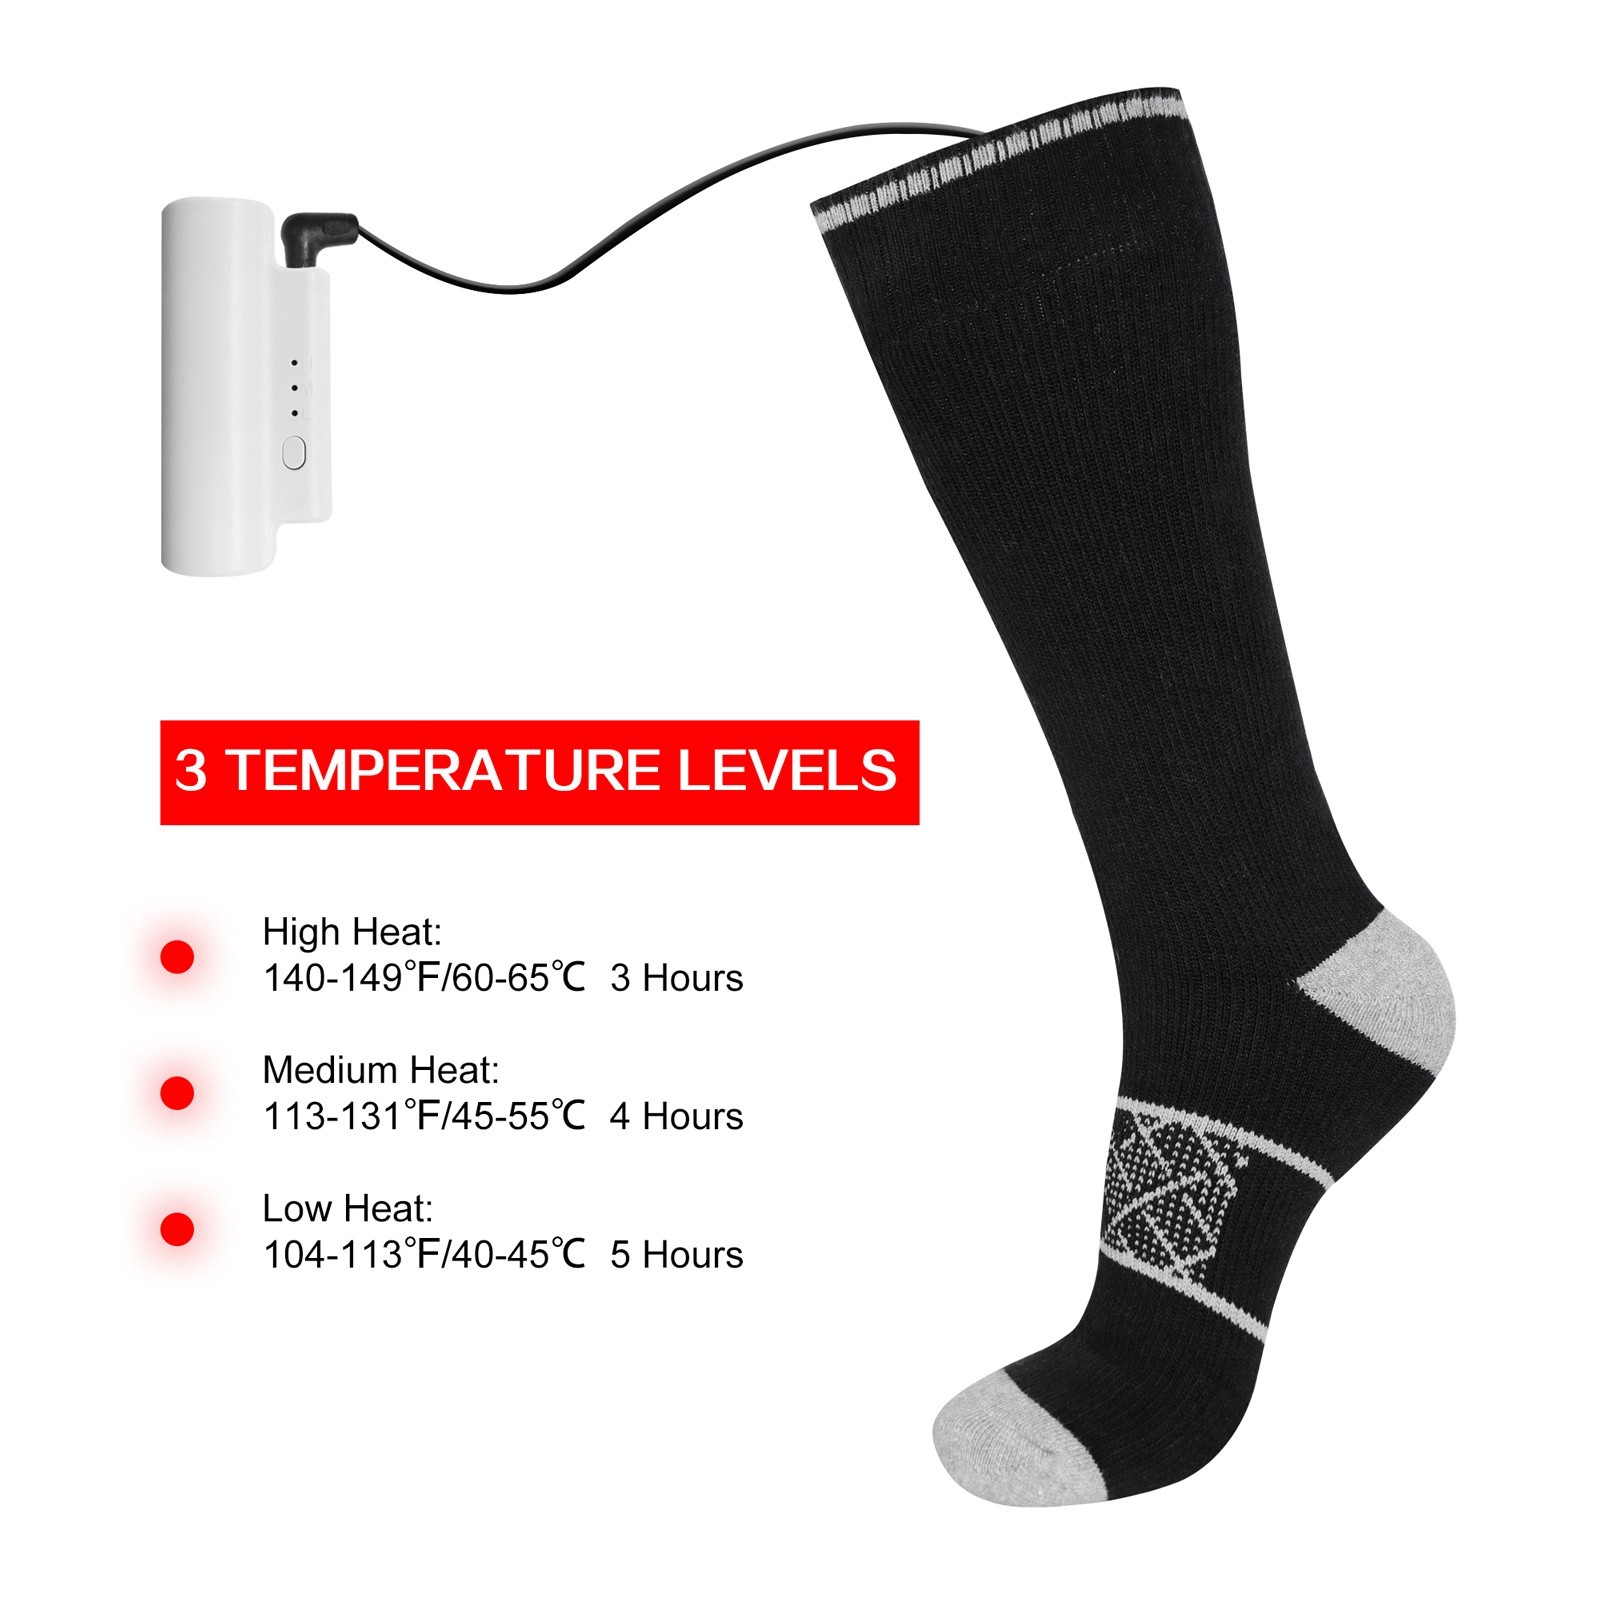 Dr. Warm cotton battery operated warming socks with smart design for home